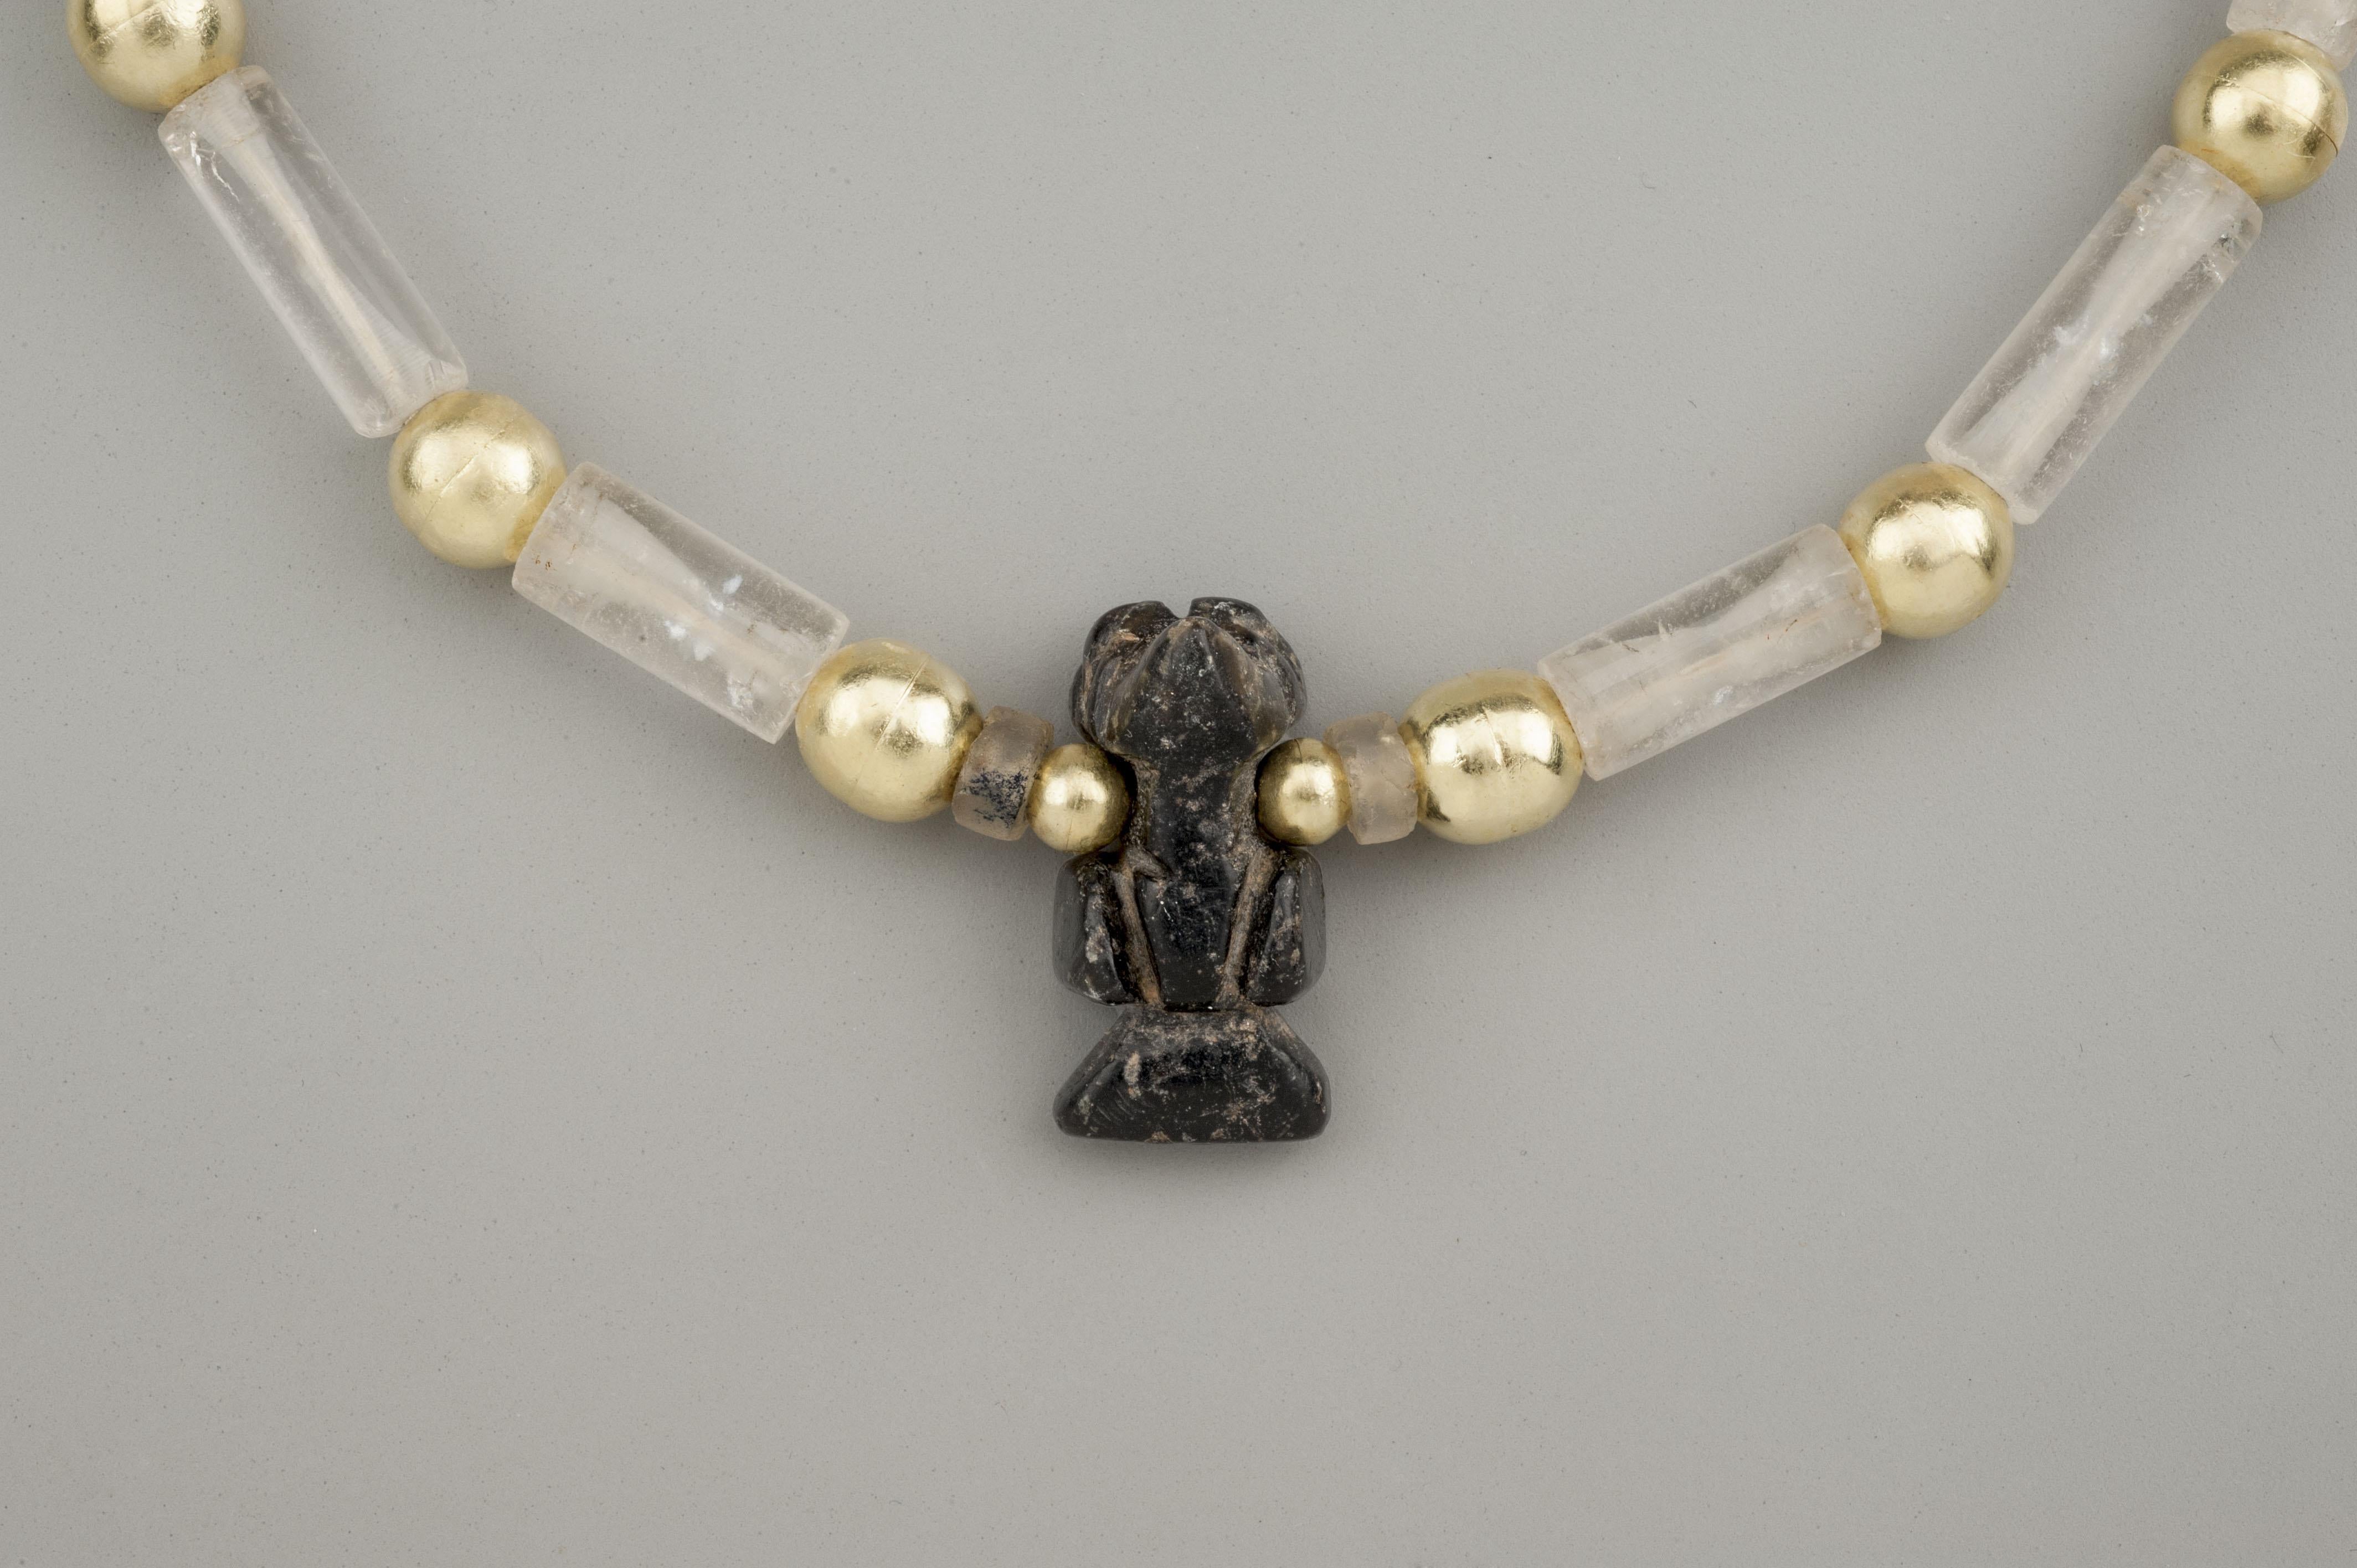 Twenty-two rock crystal cylinder beads alternating with round gold beads with a black stone eagle pendant. The stone beads and pendant are said to be from the Tairona people of Colombia, South America. They have been made entirely without the use of